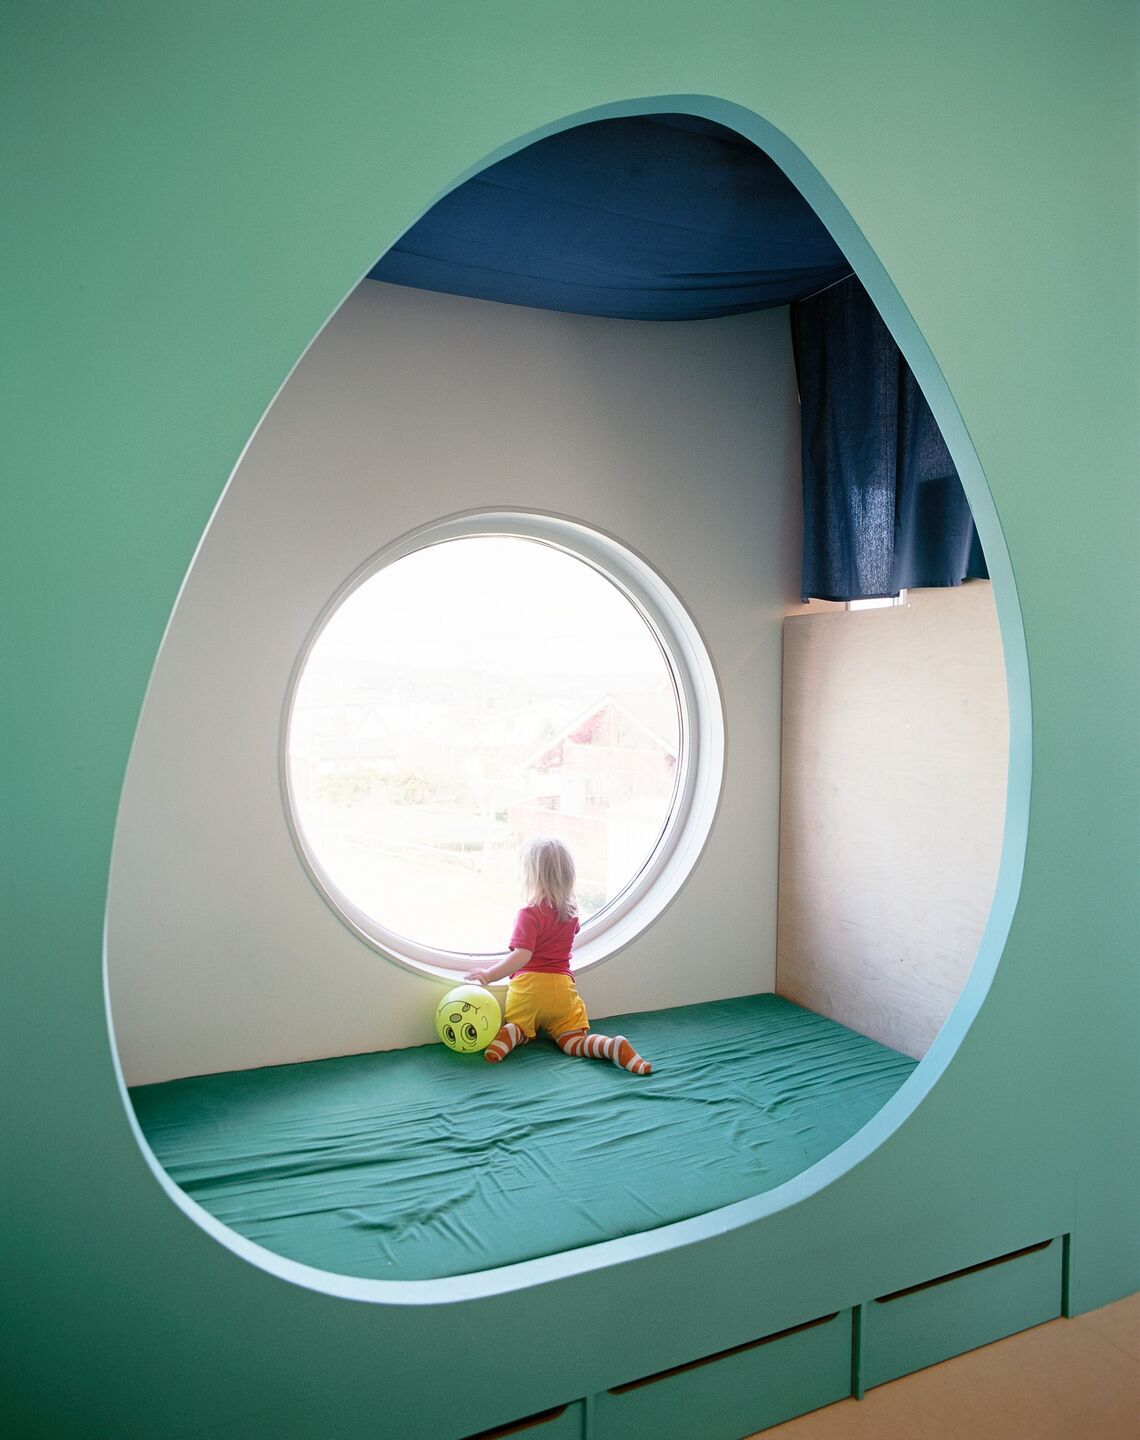 A child peers out of a circular window in an organic-shaped nook.